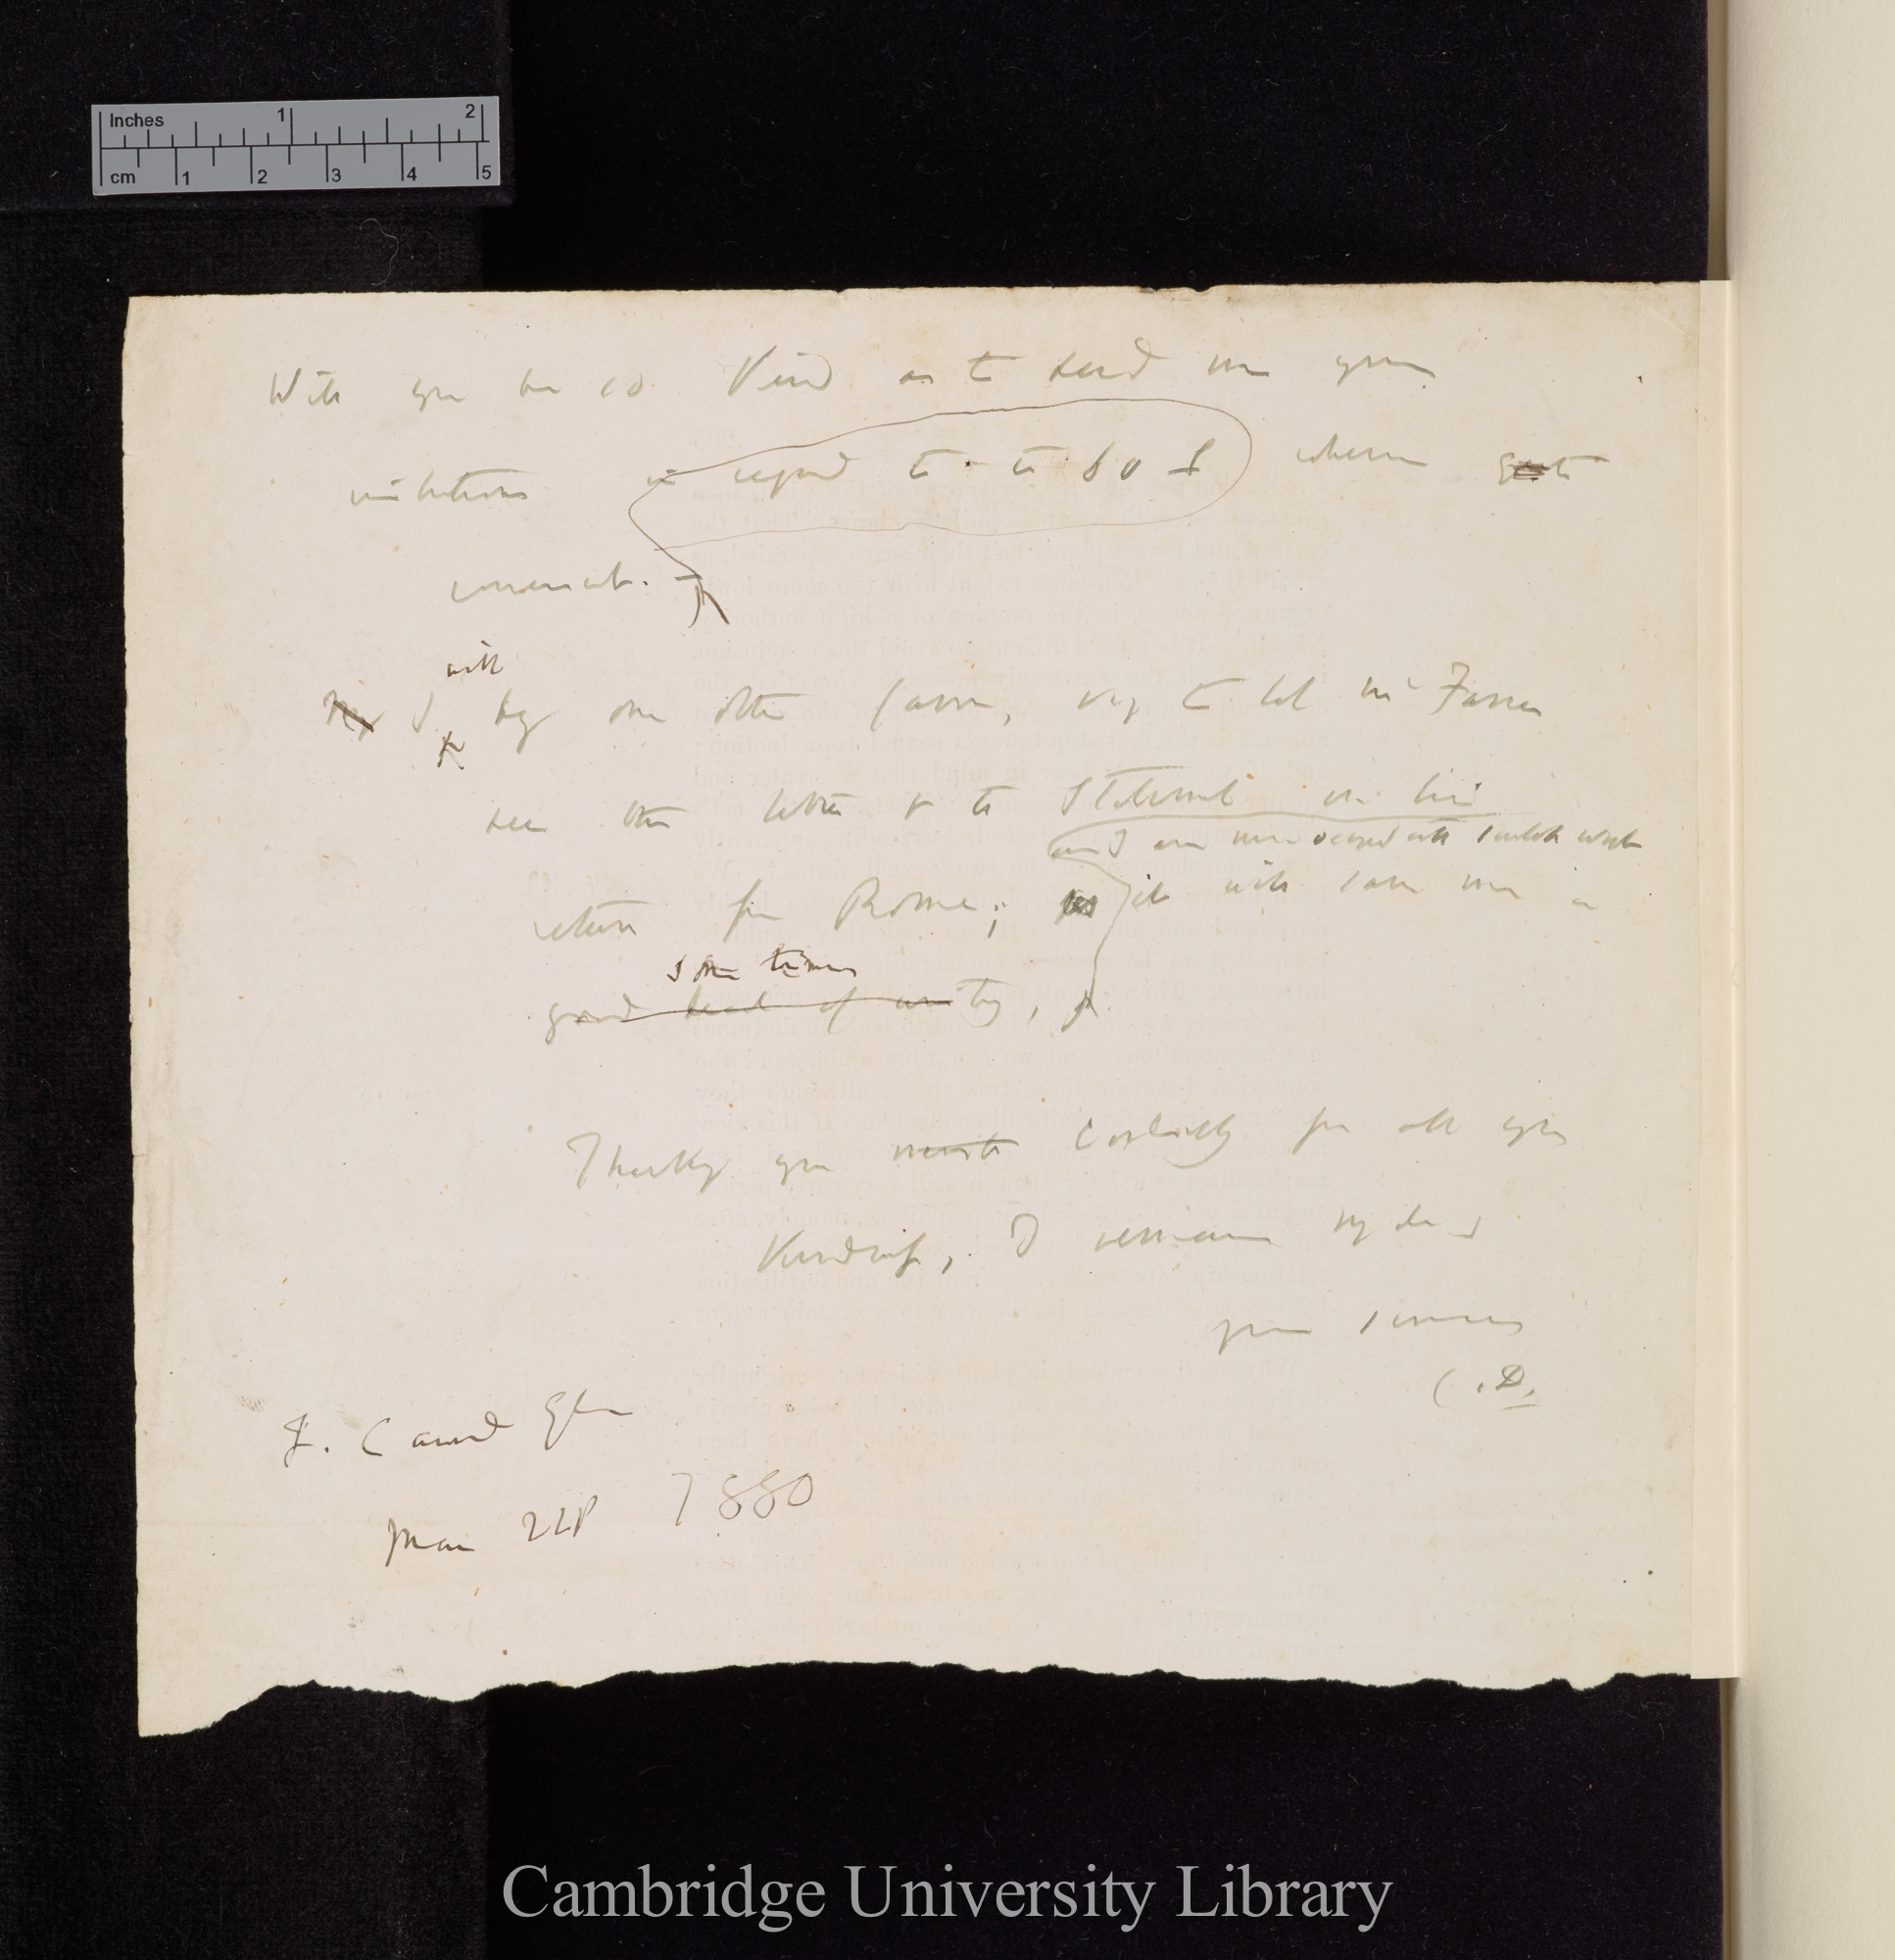 Letter from Charles Robert Darwin to Sir James Caird; written at [place unstated]; draft